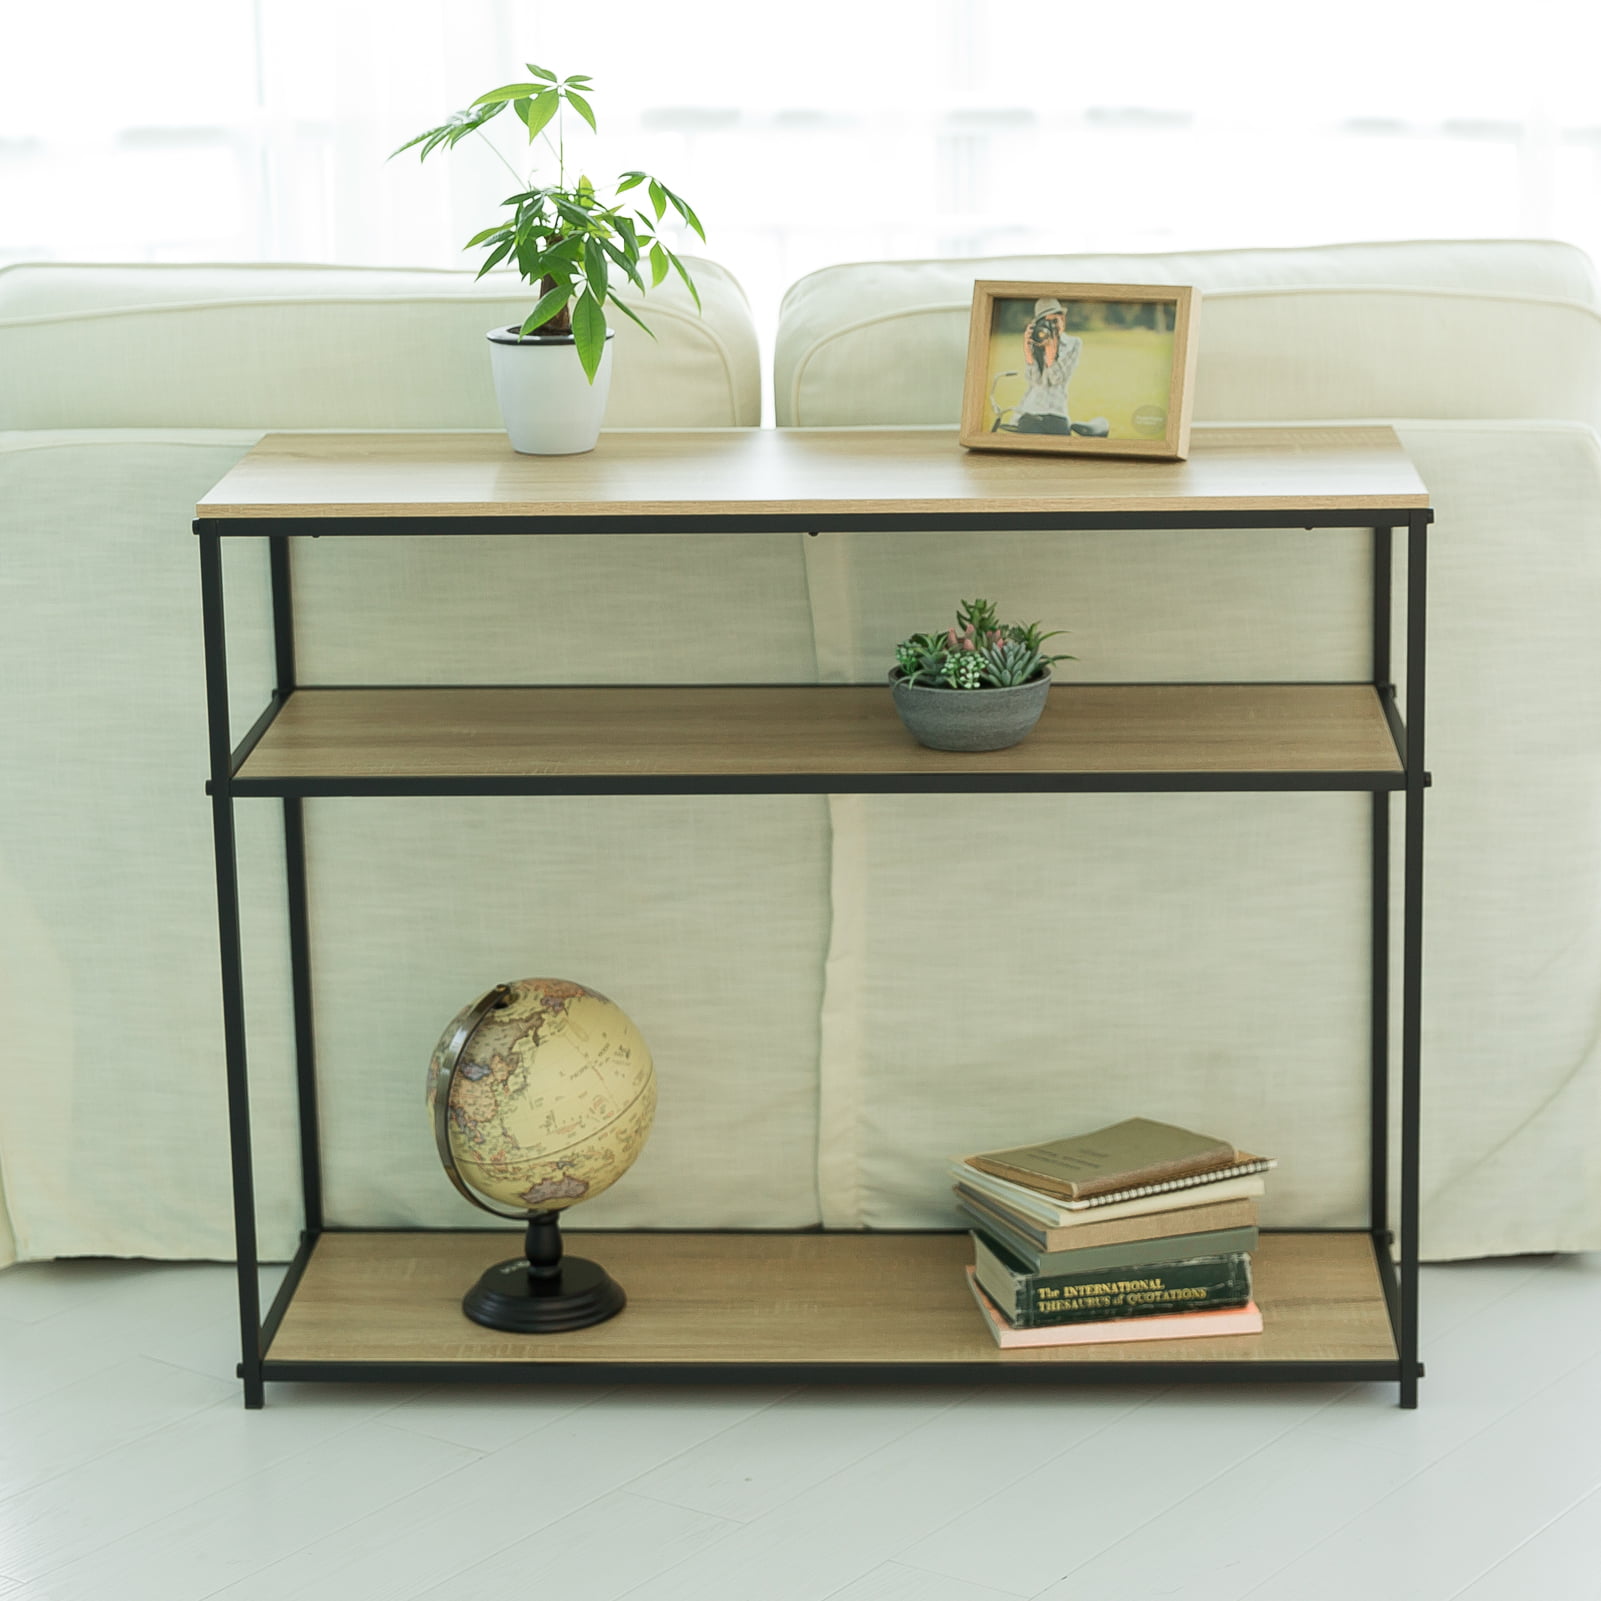 Black Metal Storage Shelves C-Hopetree Console Entry Table for Entryway Hallway Sofa